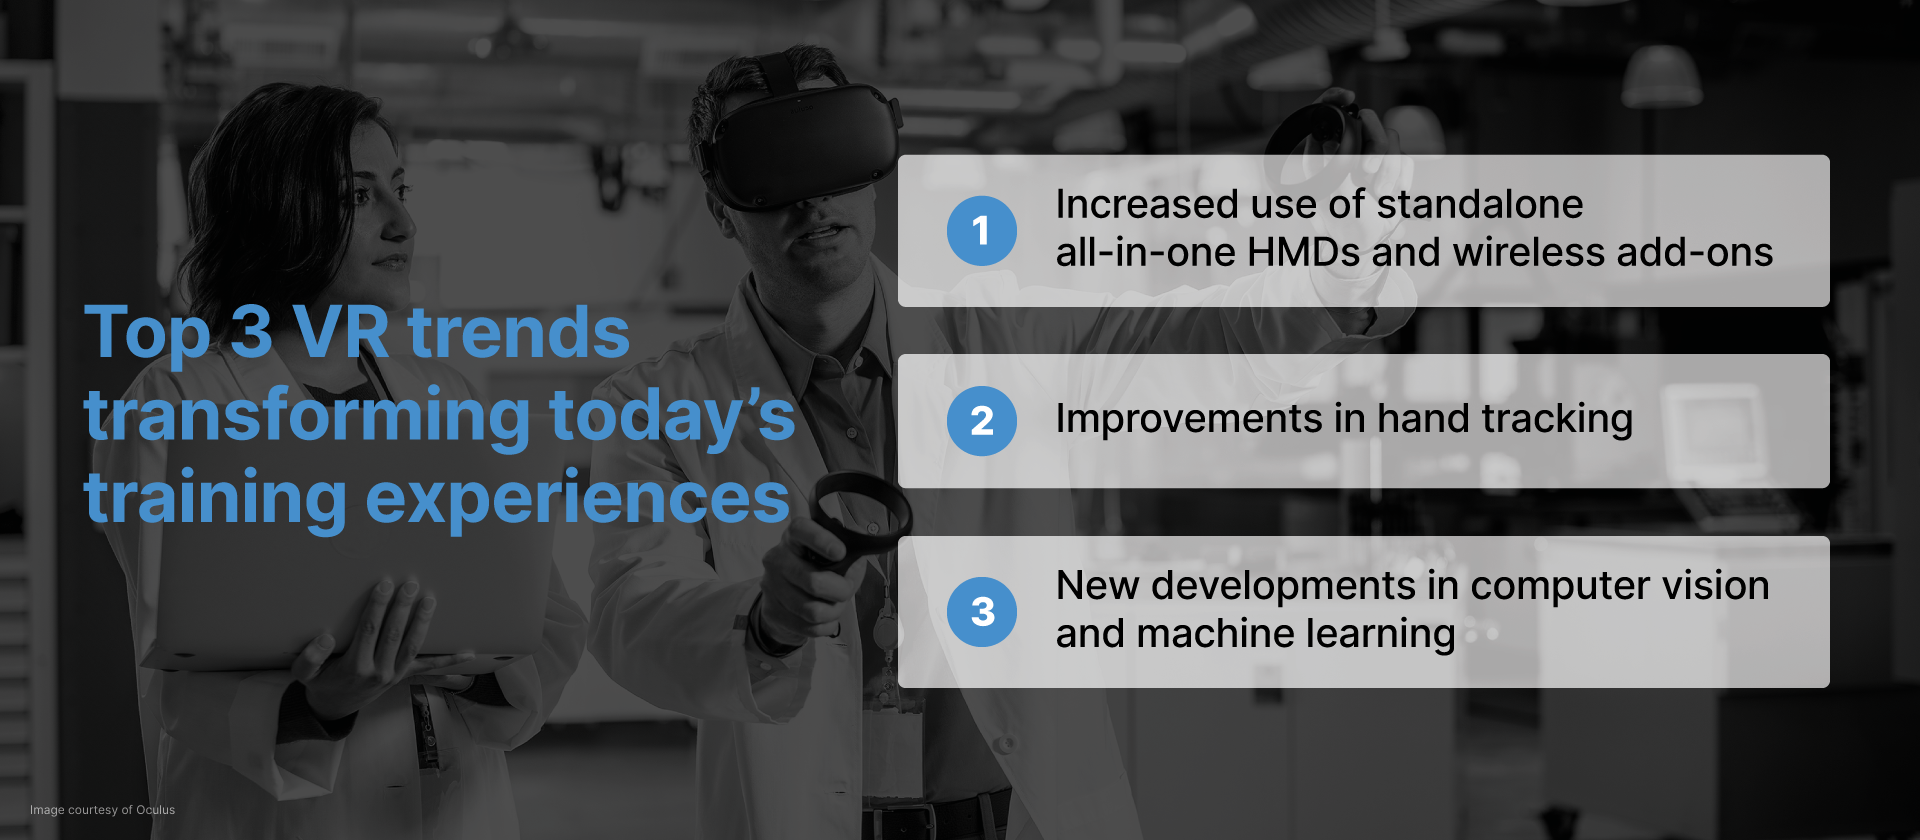 Infographic text – Top 3 VR trends transforming today’s training experiences: (1) Increased use of standalone all-in-one HMDs, (2) Improvements in hand tracking, and (3) New developments in computer vision and machine learning. 